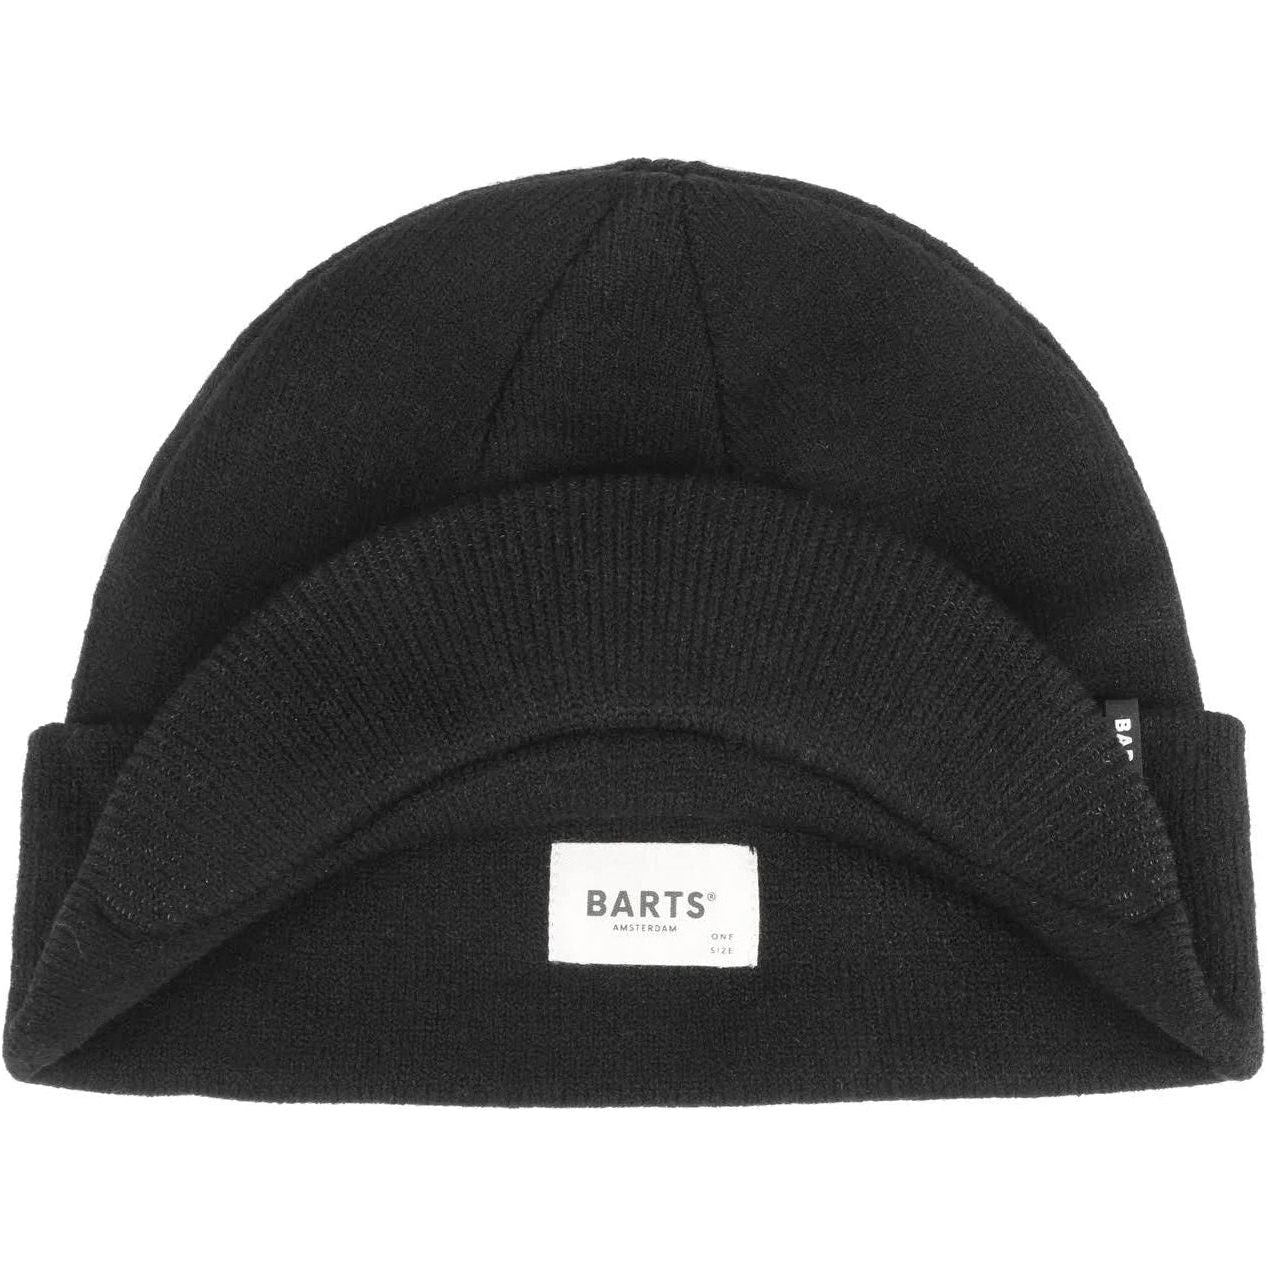 Barts Zoom Visor Beanie Front - Front View